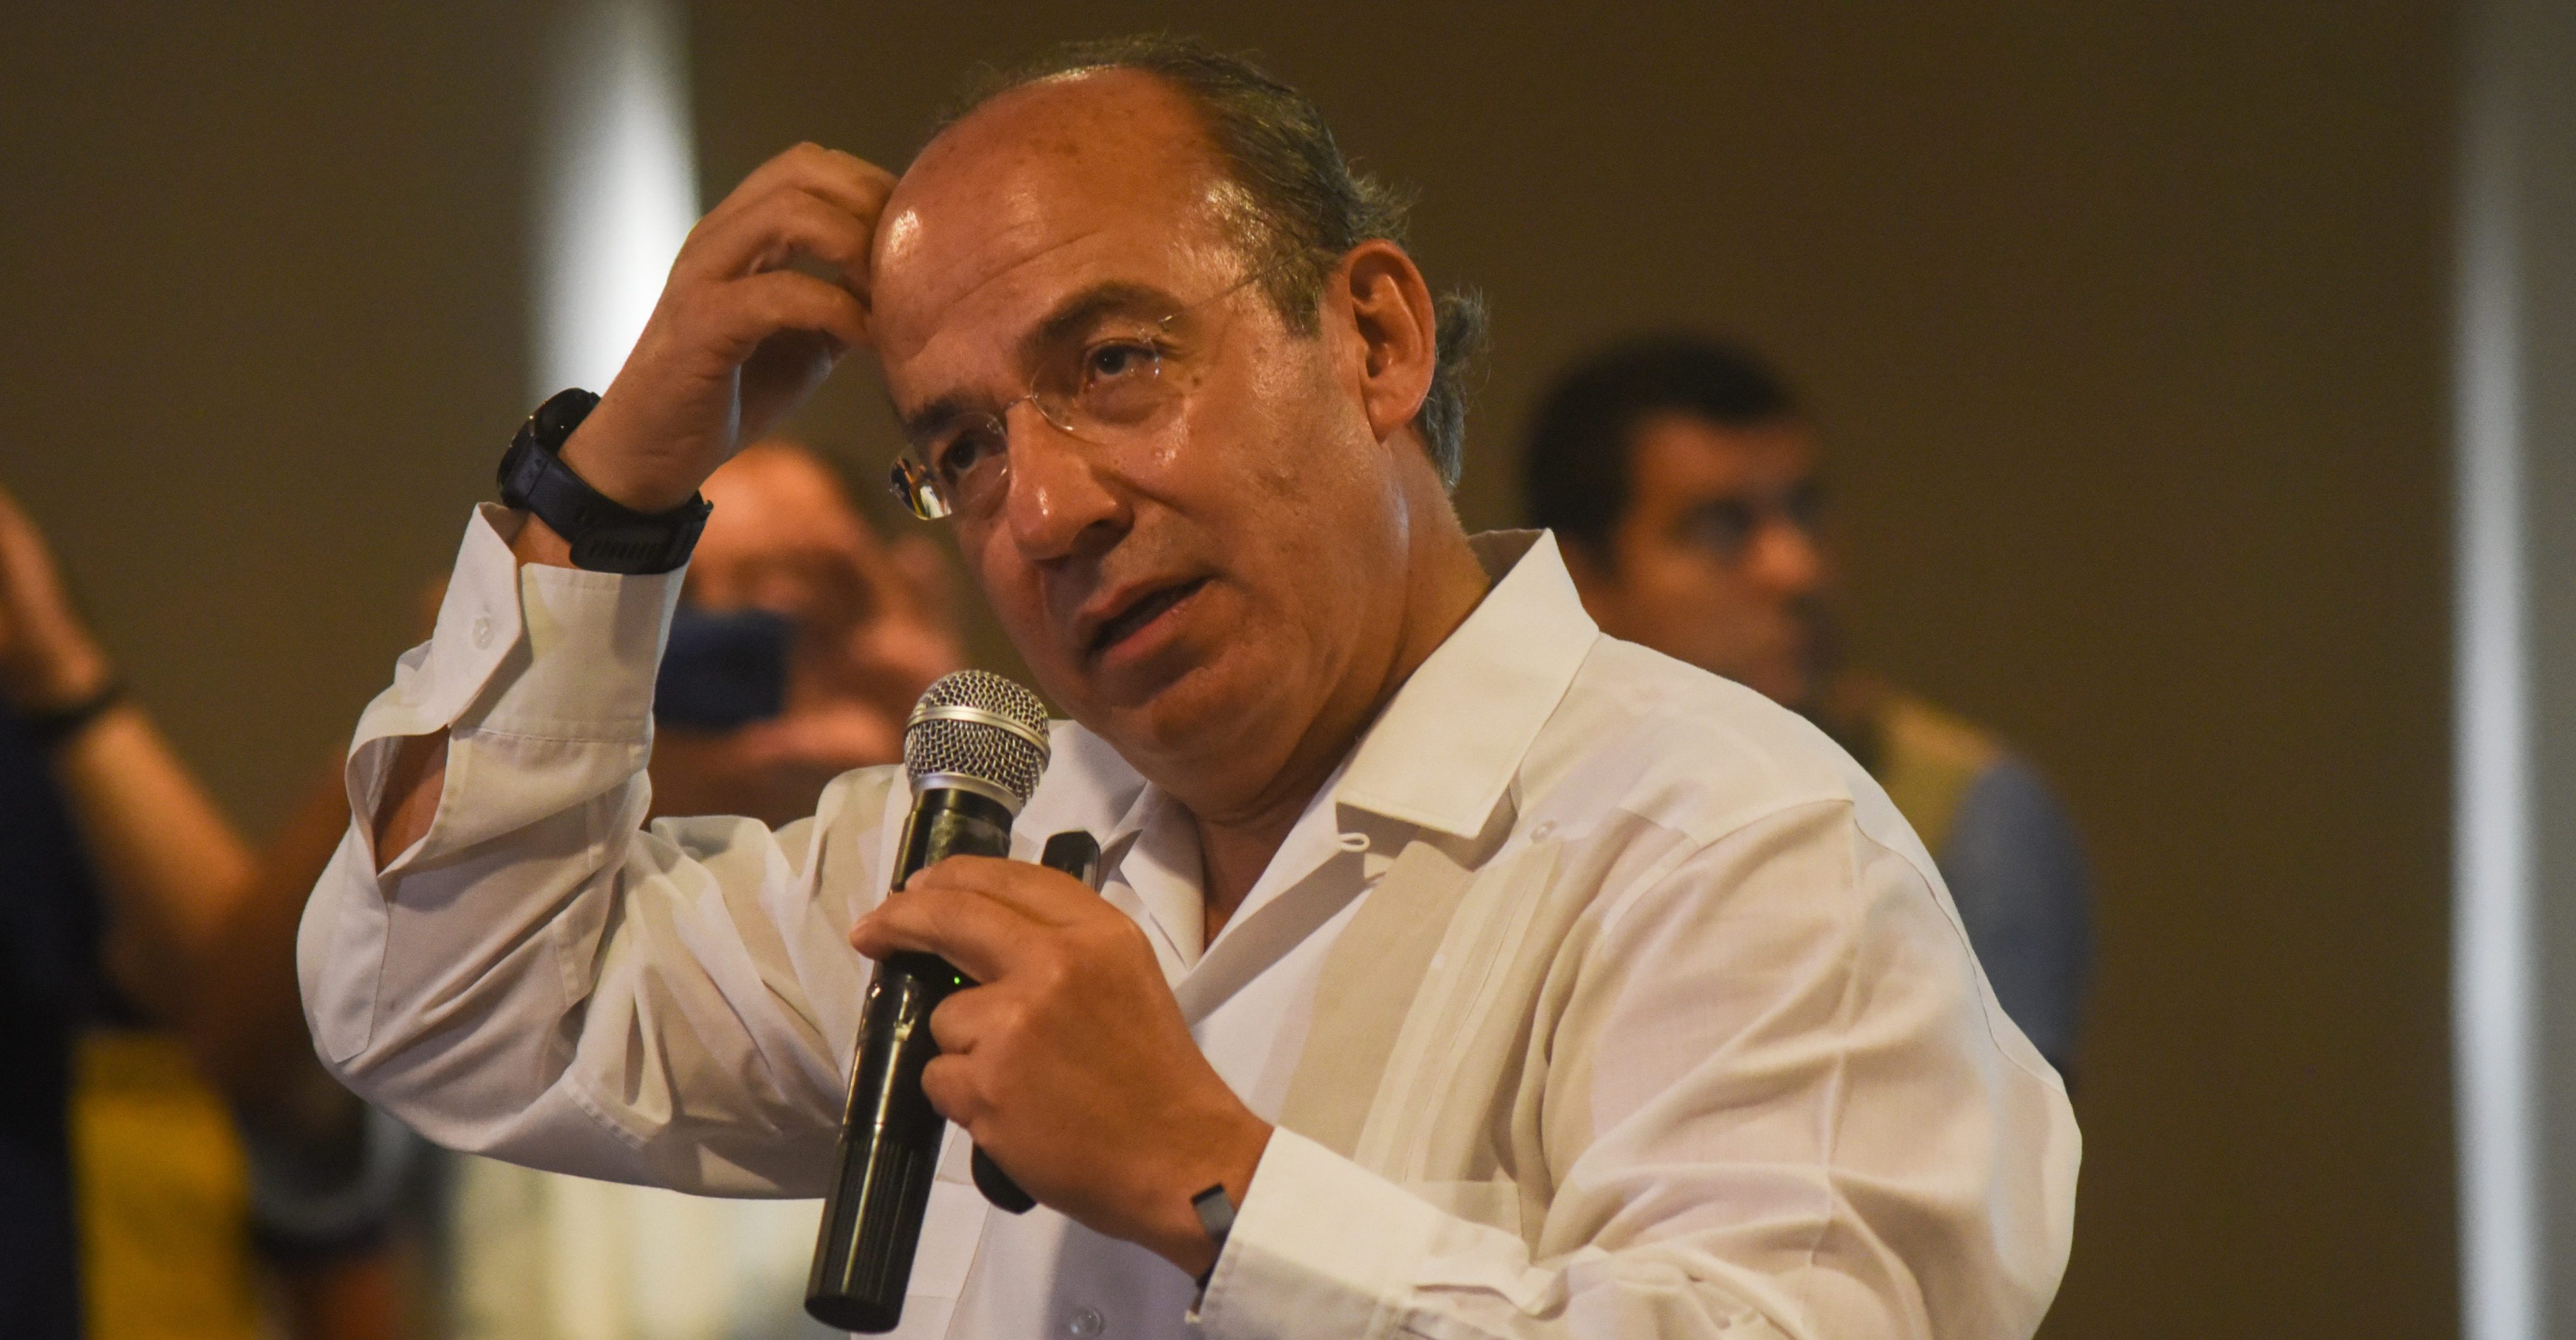 "Mexico Goes Without Authority": Calderón Criticizes Insecurity